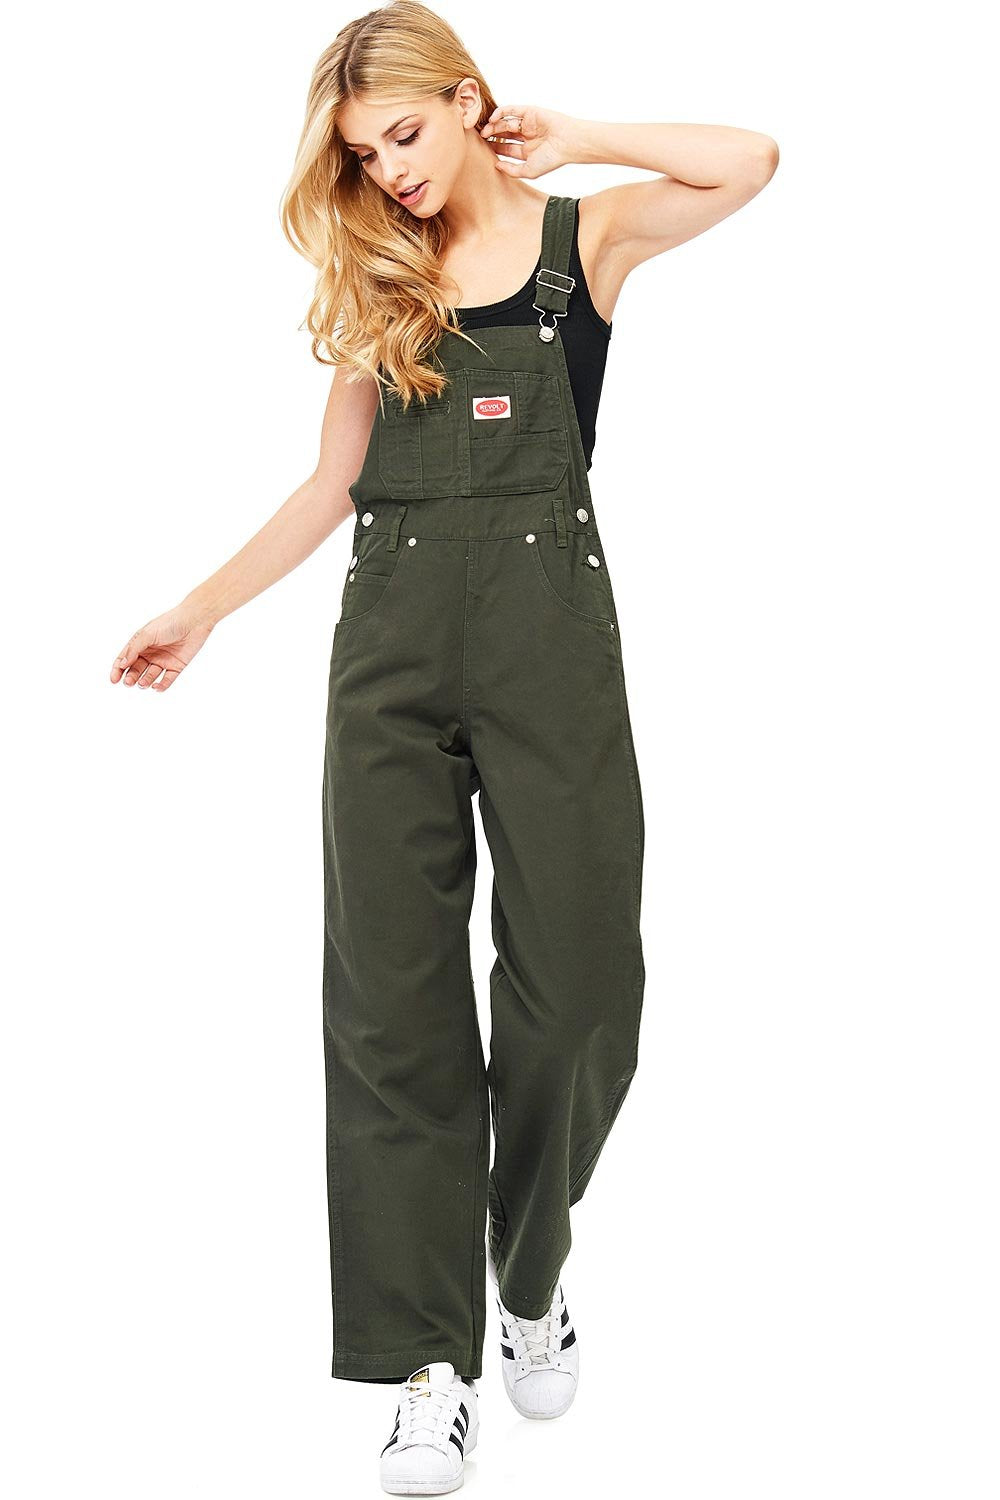 Rancher PLUS SIZE Overalls